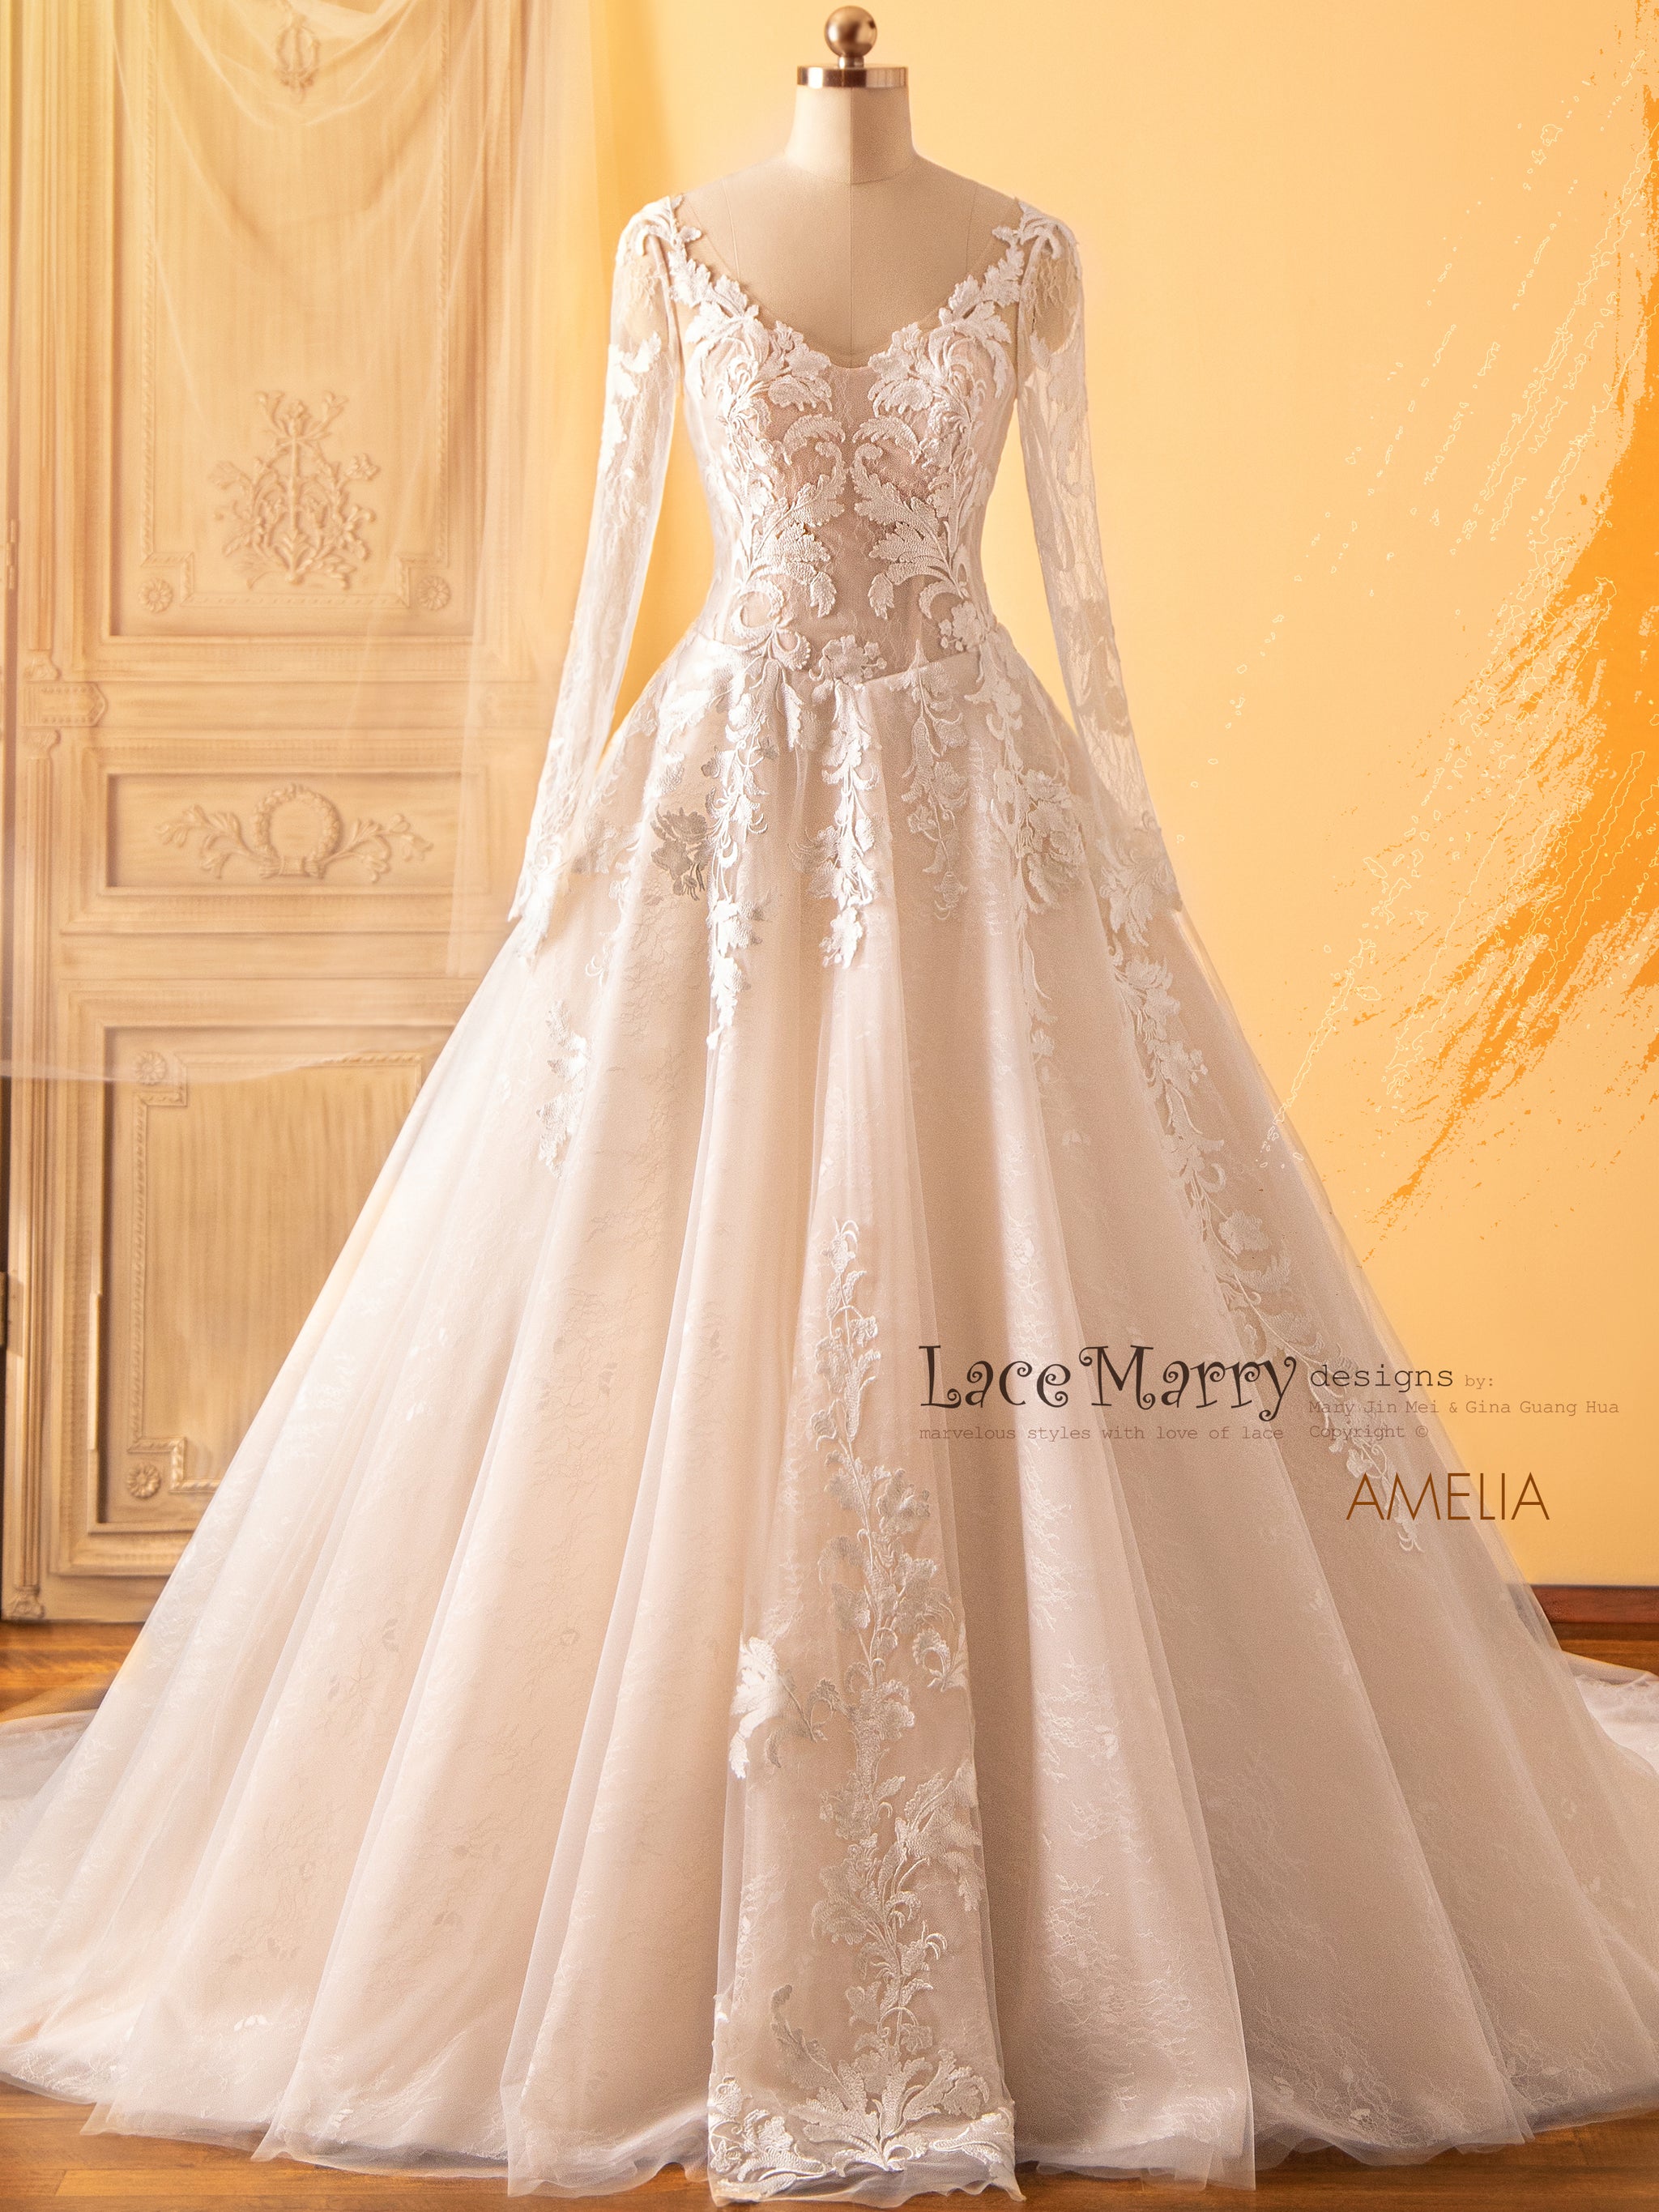 Off-Shoulder Lace Wedding Dress with Long Sleeves - LaceMarry